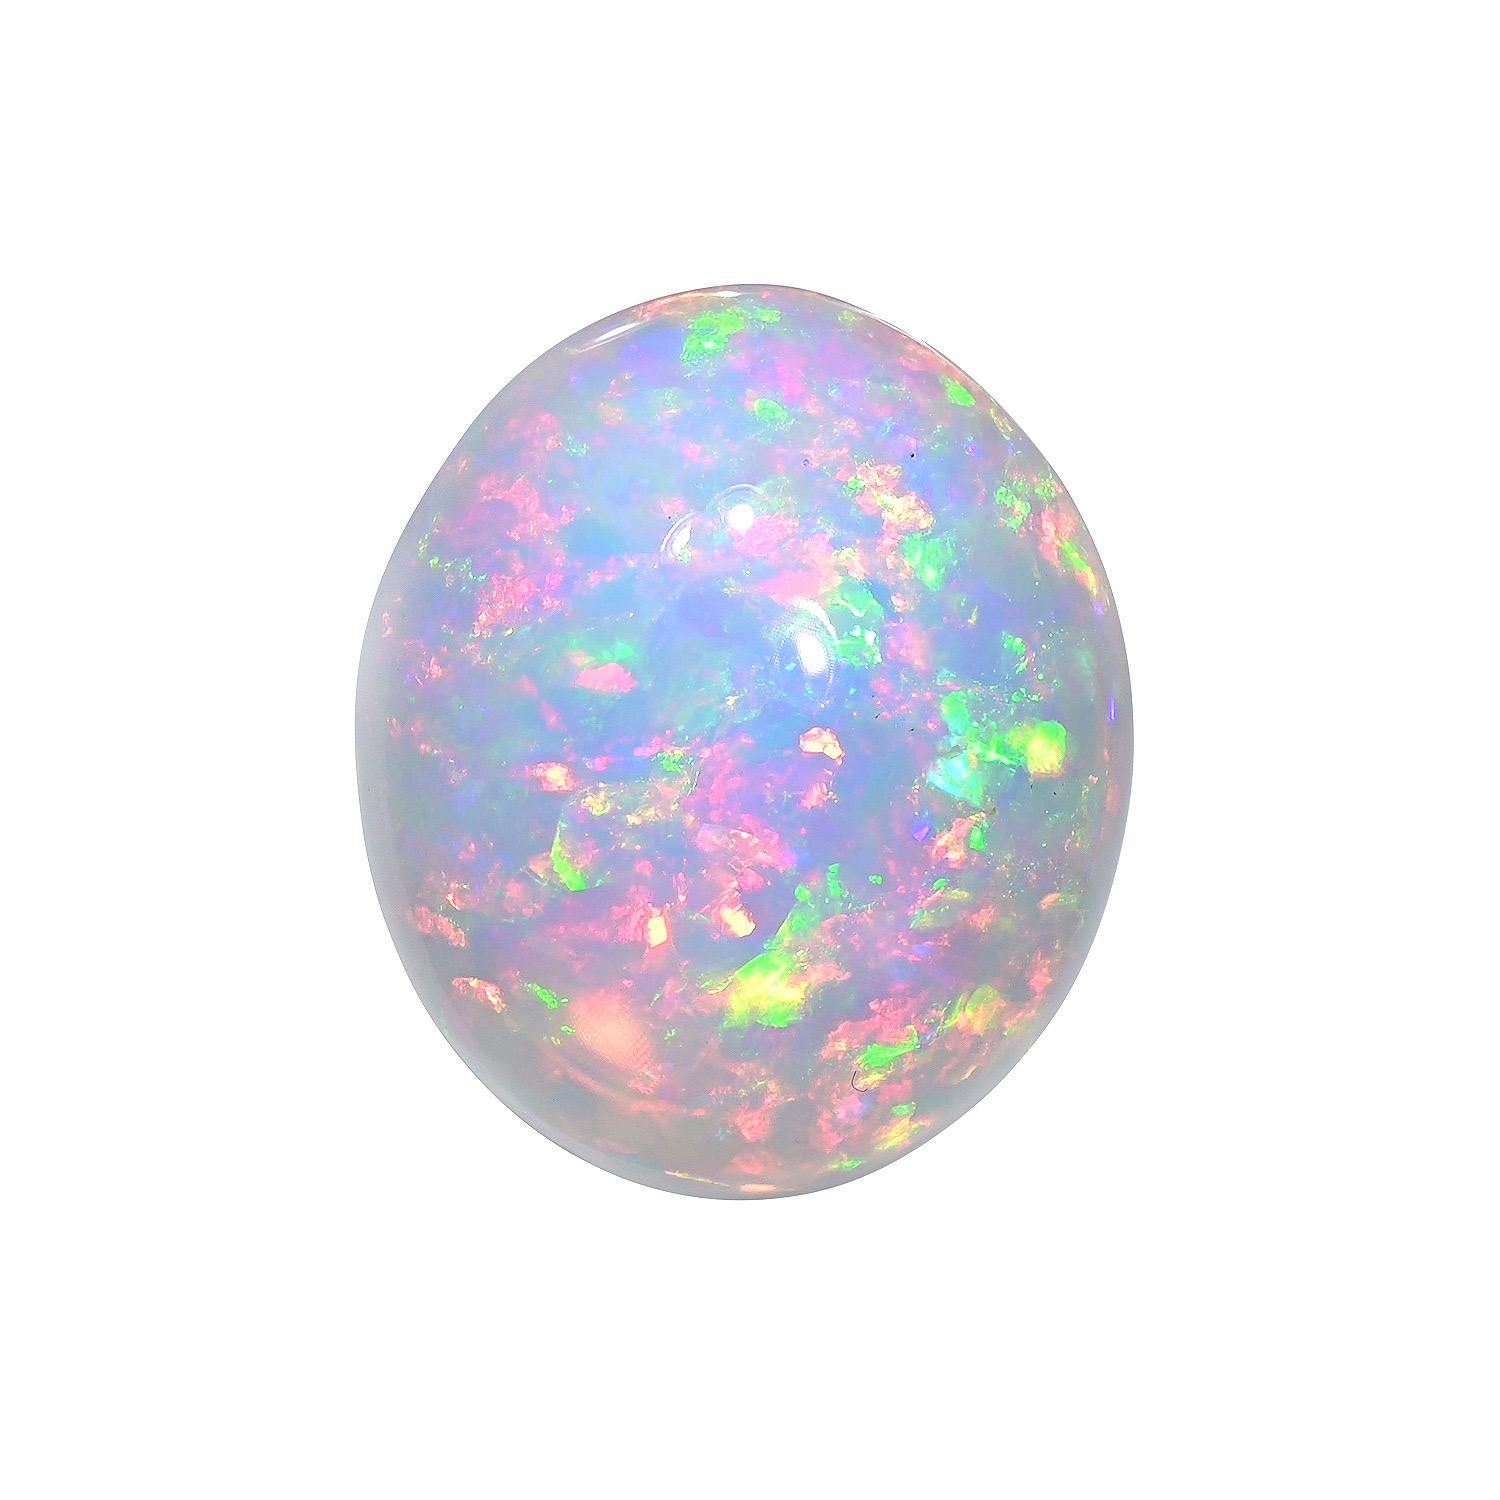 Natural 36.67 carat oval Ethiopian Opal loose gemstone, offered unmounted to a fine gem enthusiast.
Returns are accepted and paid by us within 7 days of delivery.
We offer supreme custom jewelry work upon request. Please contact us for more